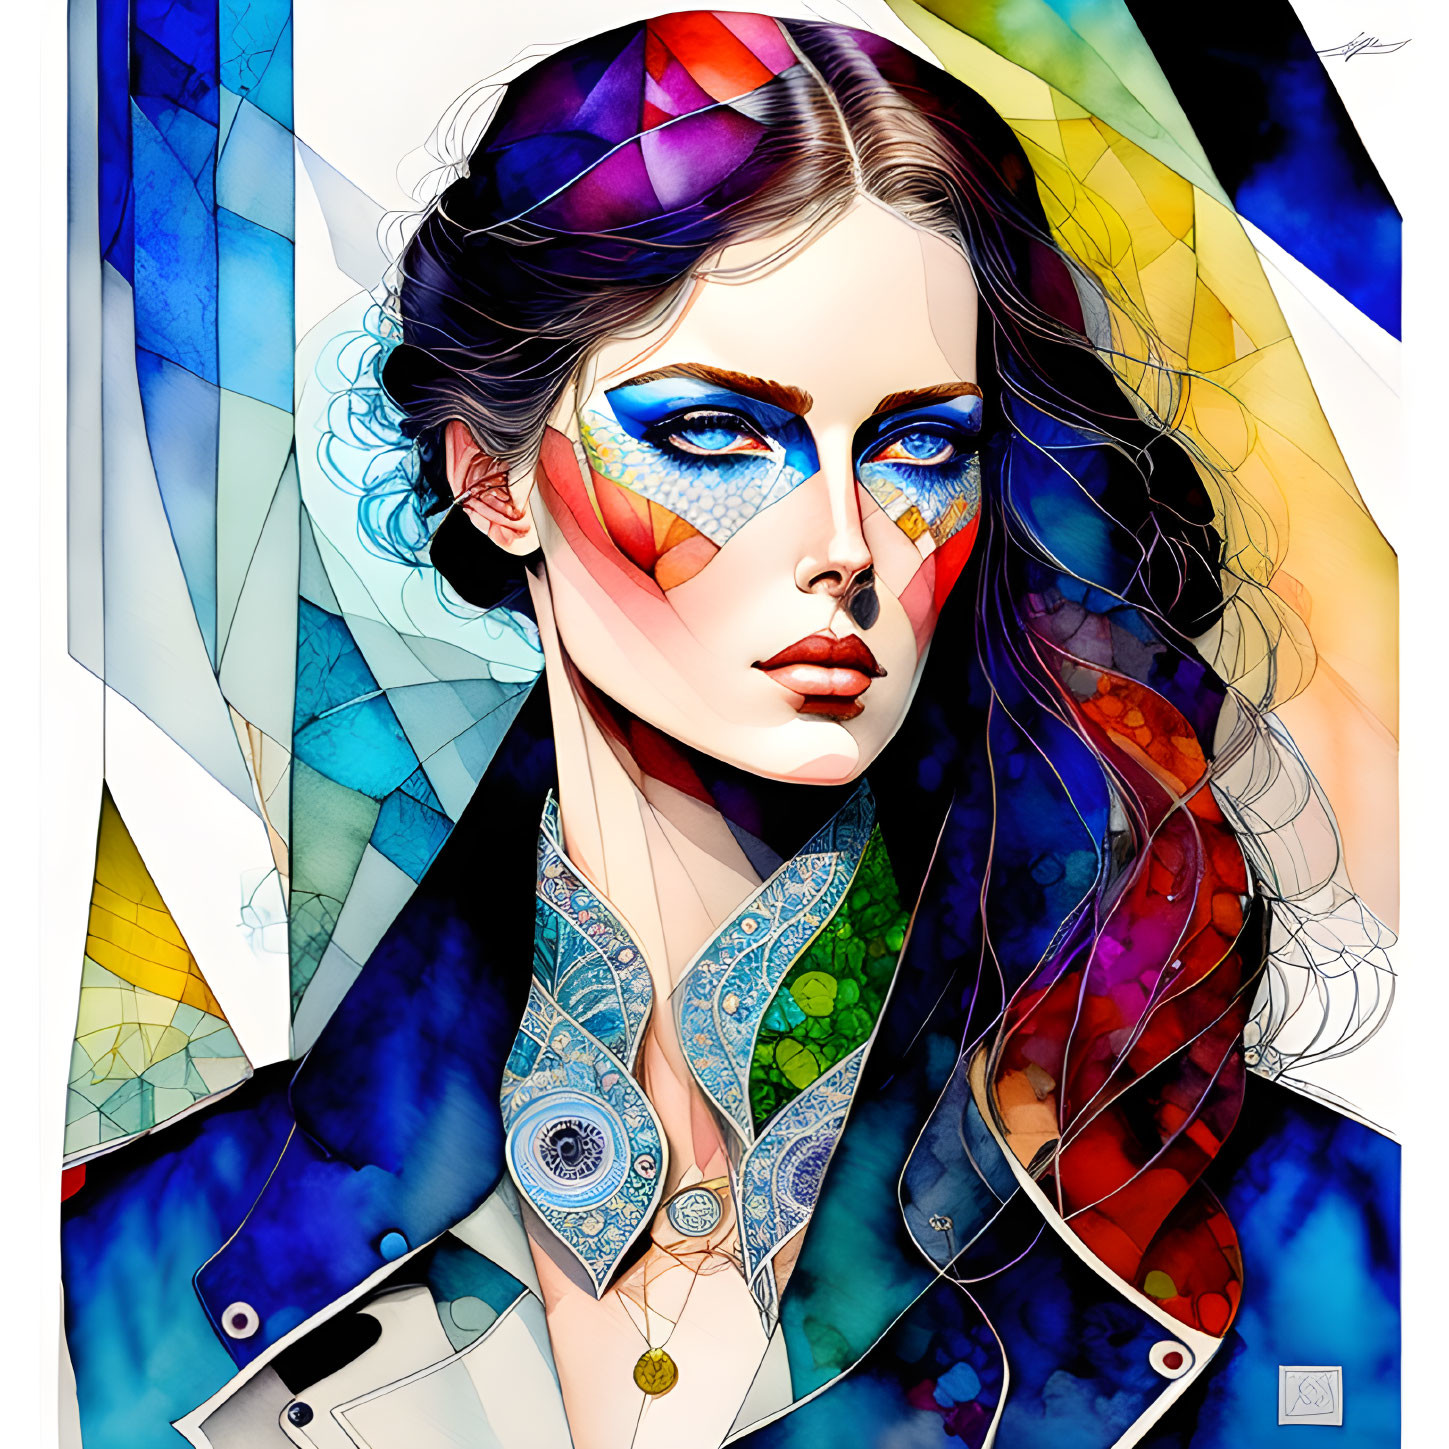 Vibrant geometric watercolor illustration of a stylized woman with striking makeup